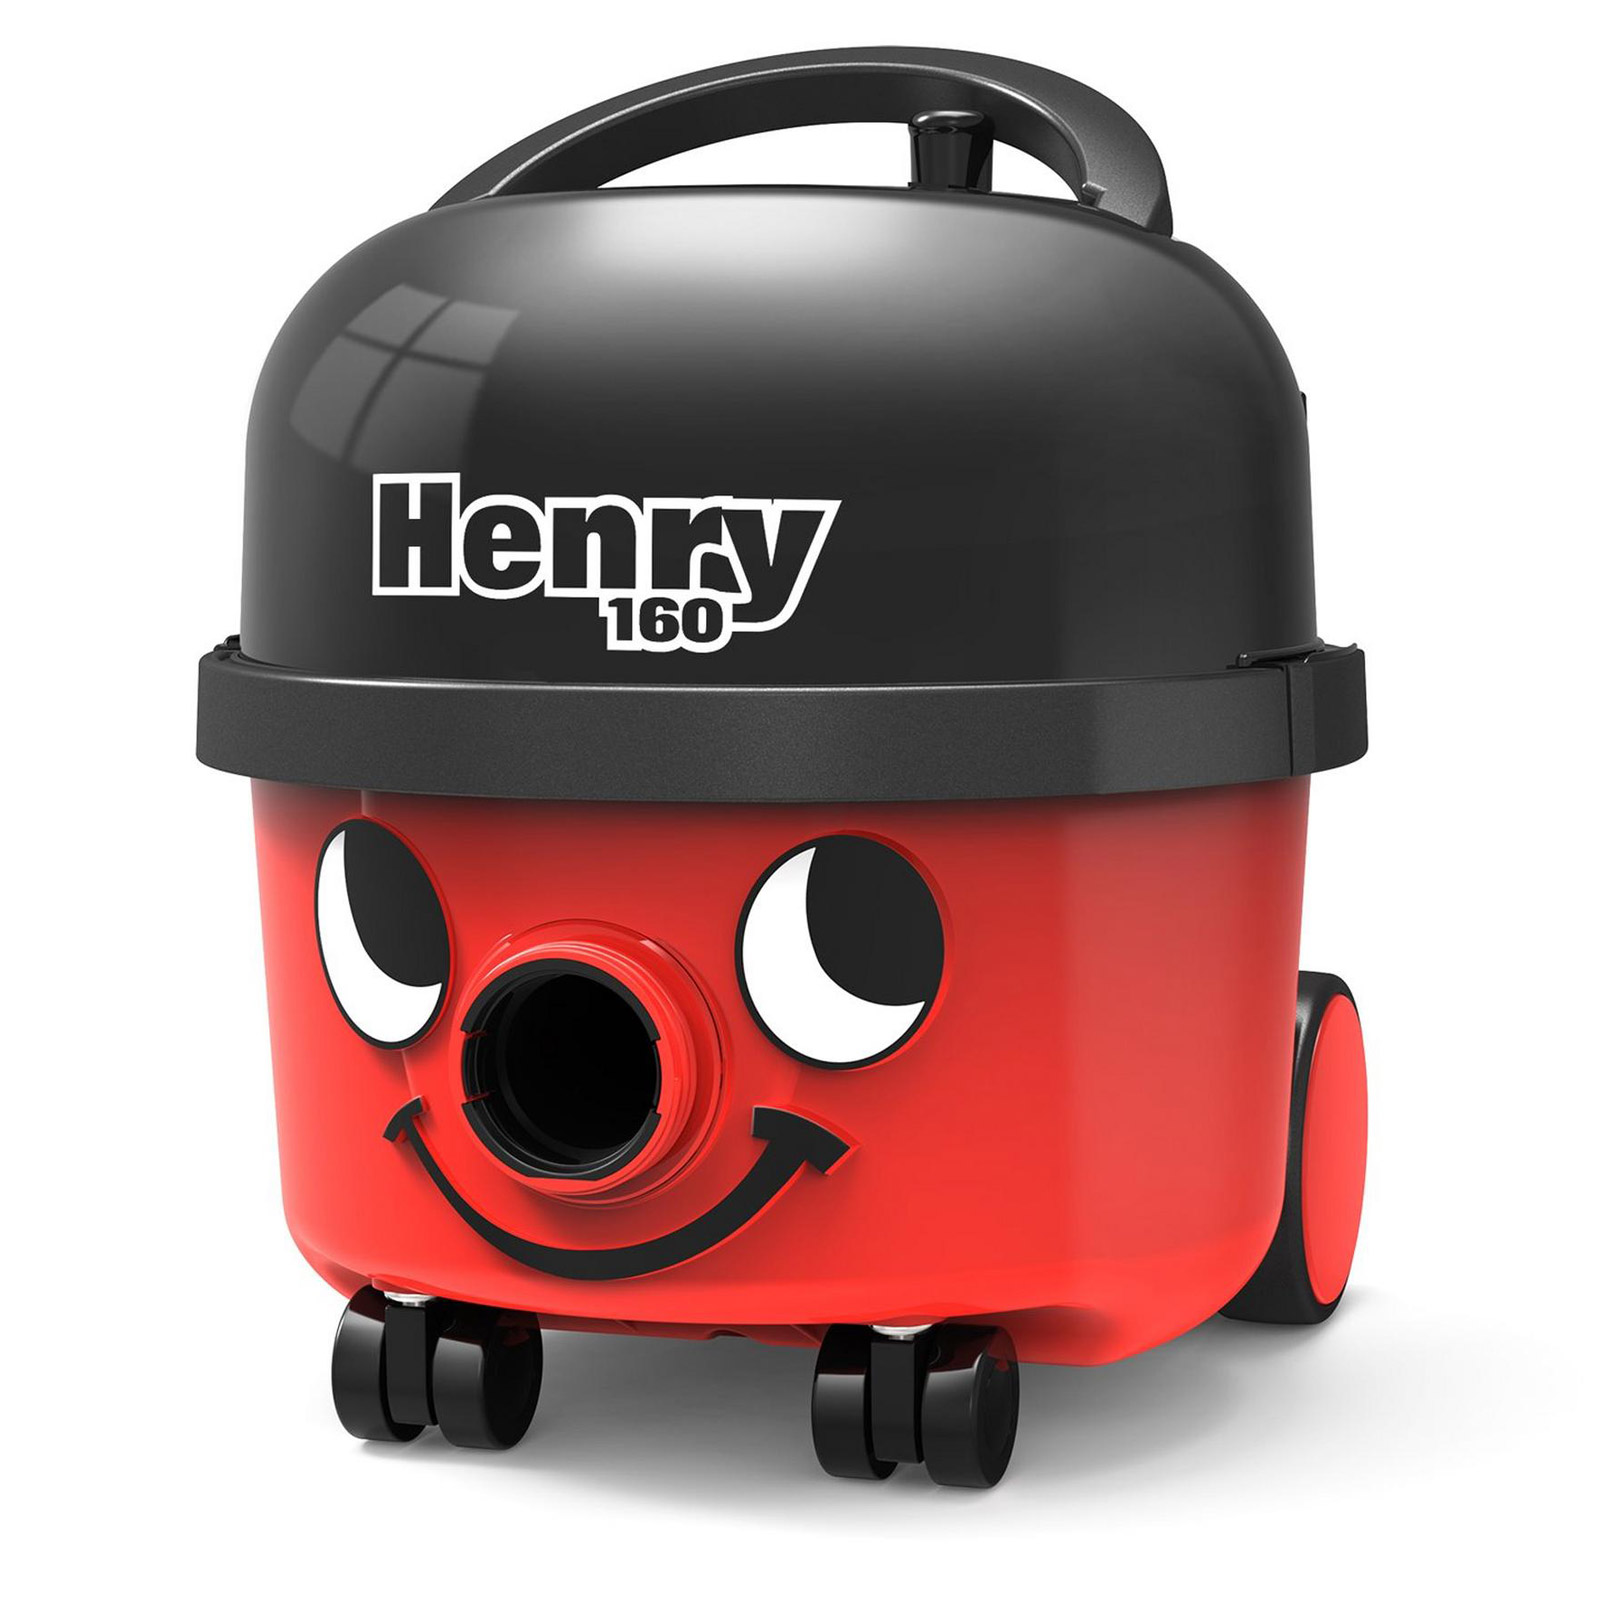 Image of Numatic HVR160E HENRY Eco Cylinder Vacuum Cleaner in Red Bagged